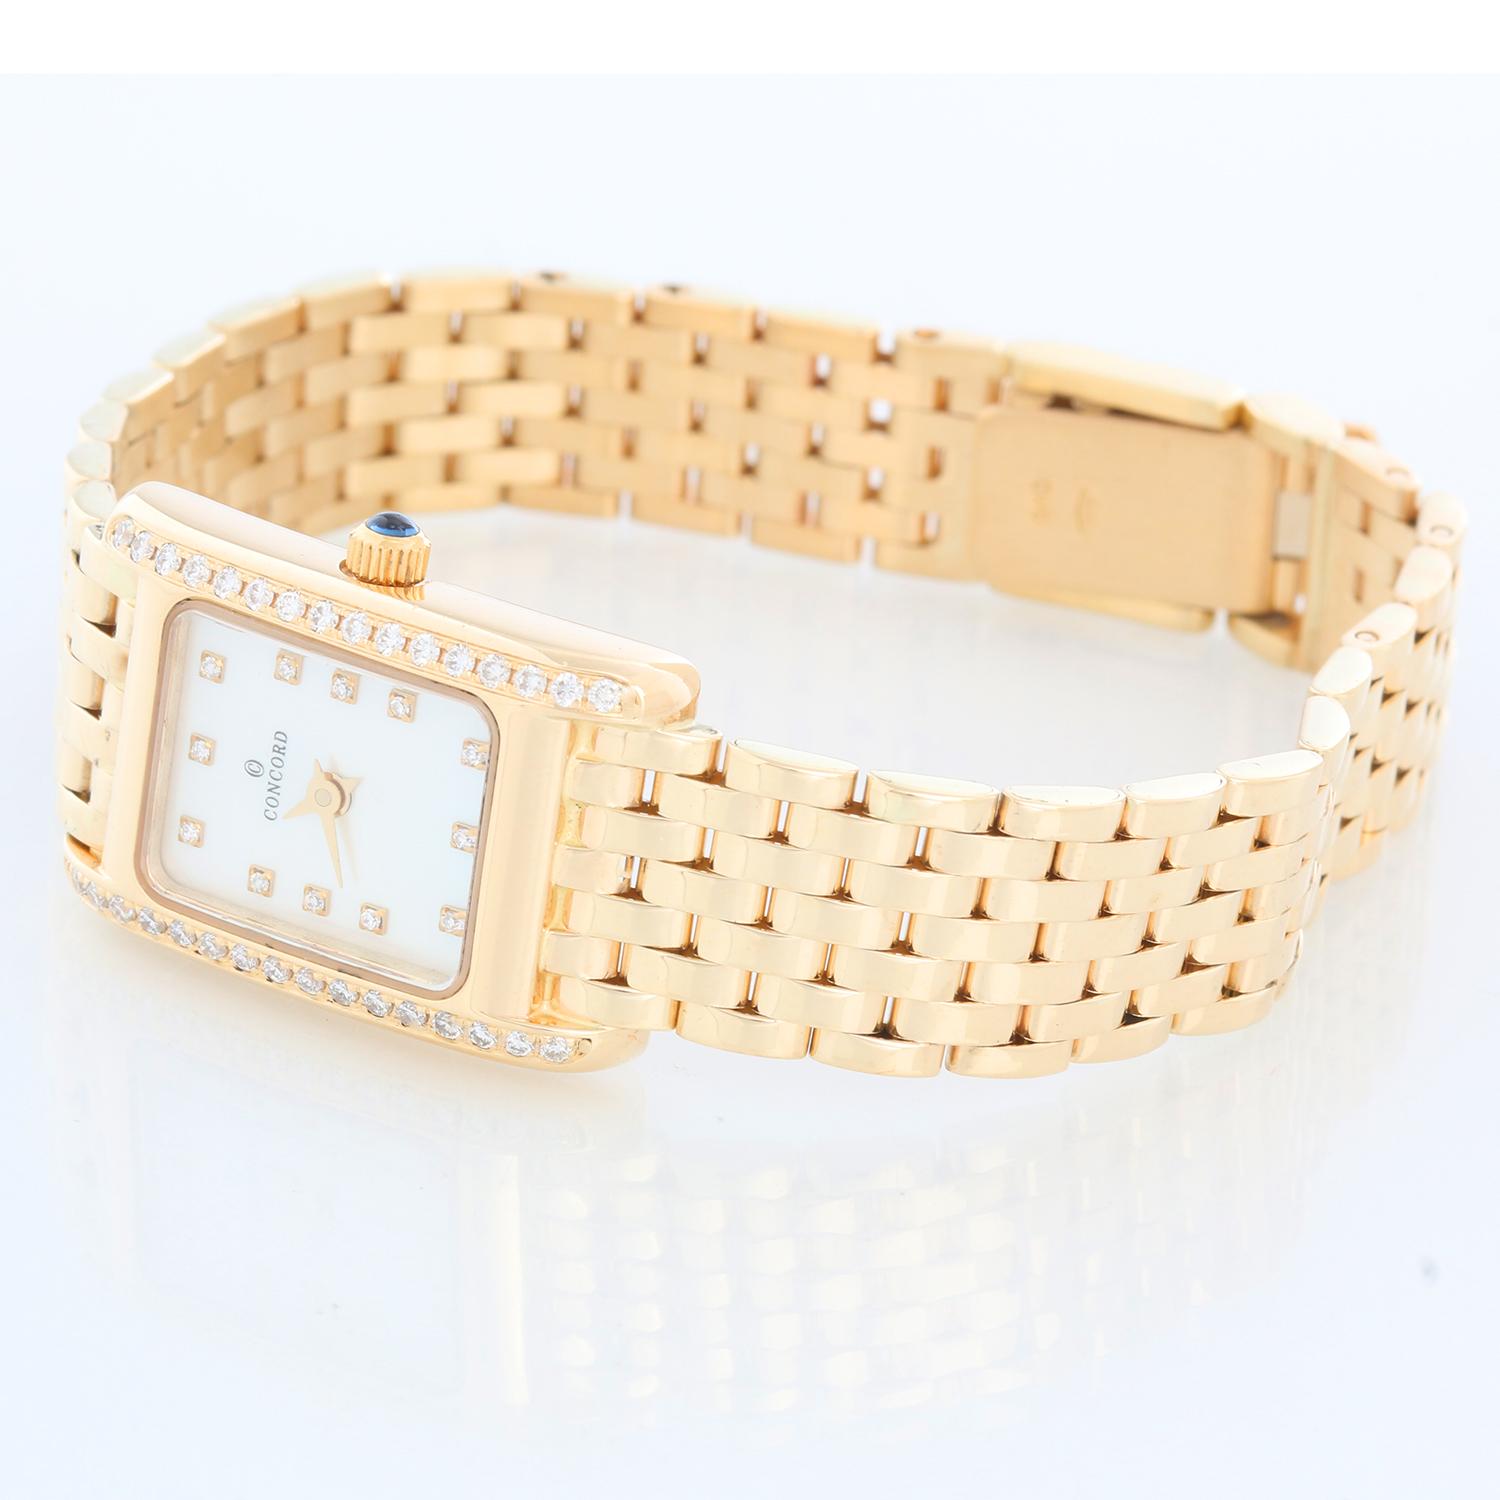 Concord 14K Yellow Gold La Tour Ladies Watch - Quartz. 18K Yellow gold case ( 17 mm ). Mother of Pearl dial with diamond hour markers. 14K Yellow gold bracelet. Will git up to a 5.75 inch wrist. Pre-owned with custom box .